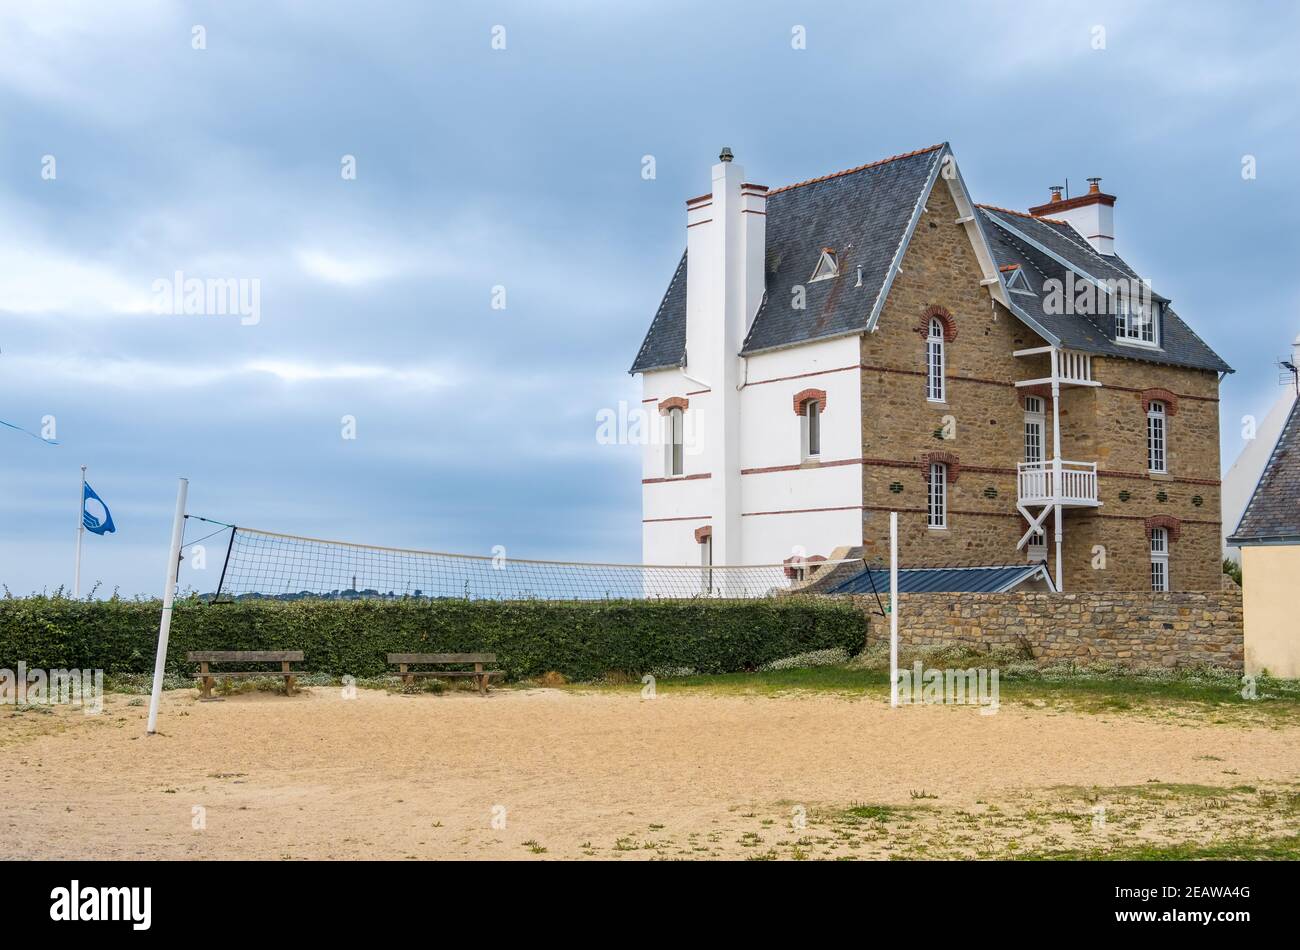 Roscoff, France - August 28, 2019: Cityscape with old residential buildings of Roscoff in Brittany Stock Photo